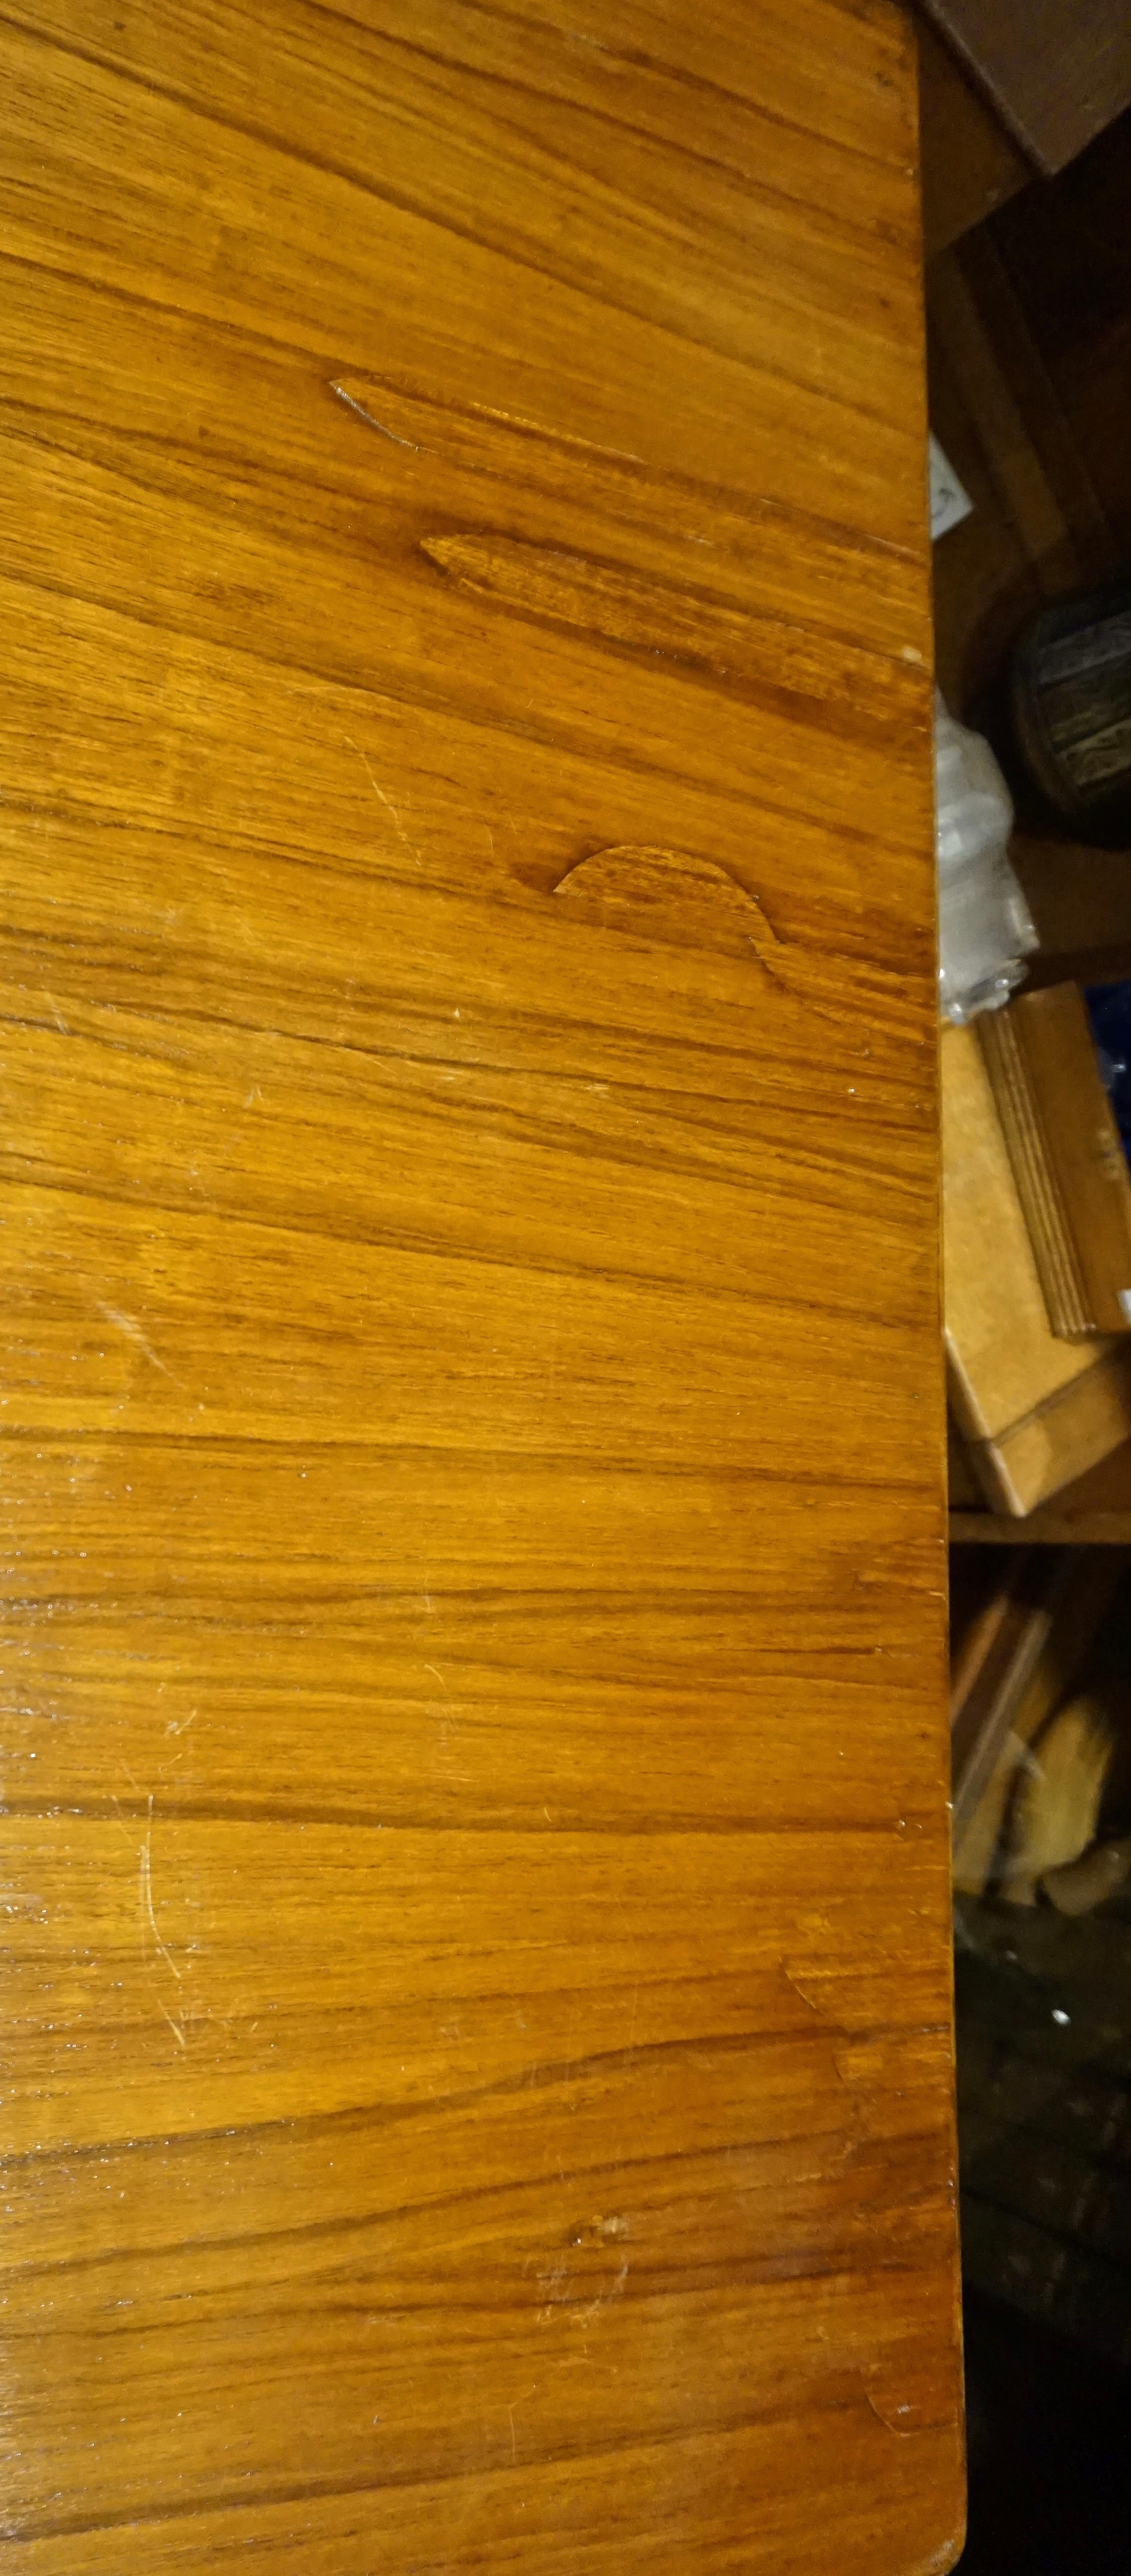 Art Deco Steamship Chimney Teak Dining Table Desk In Good Condition For Sale In Vancouver, British Columbia